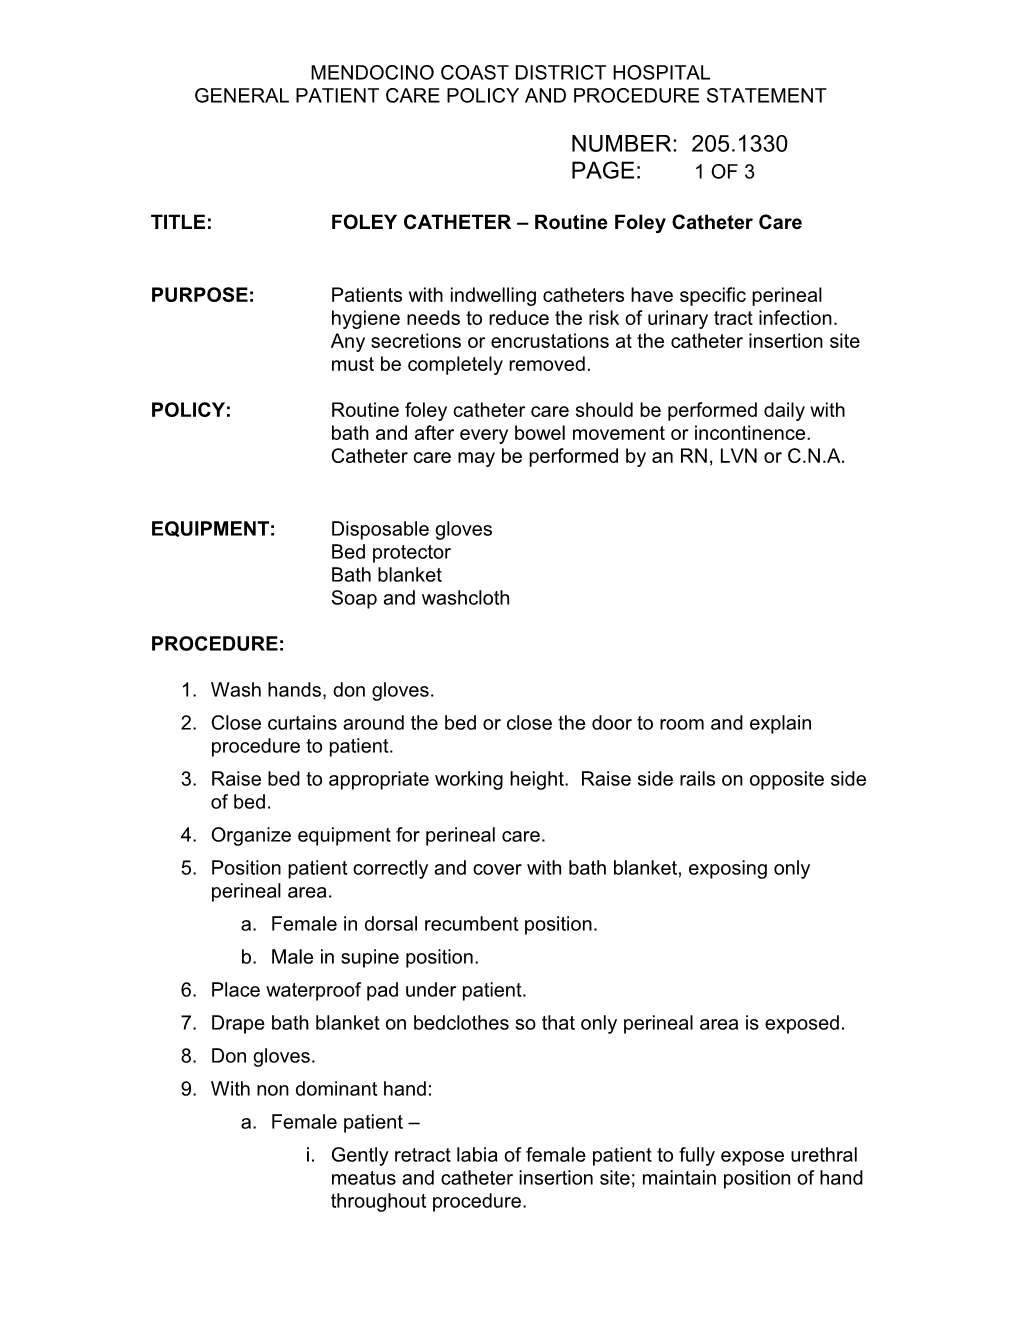 General Patient Care Policy and Procedure Statement